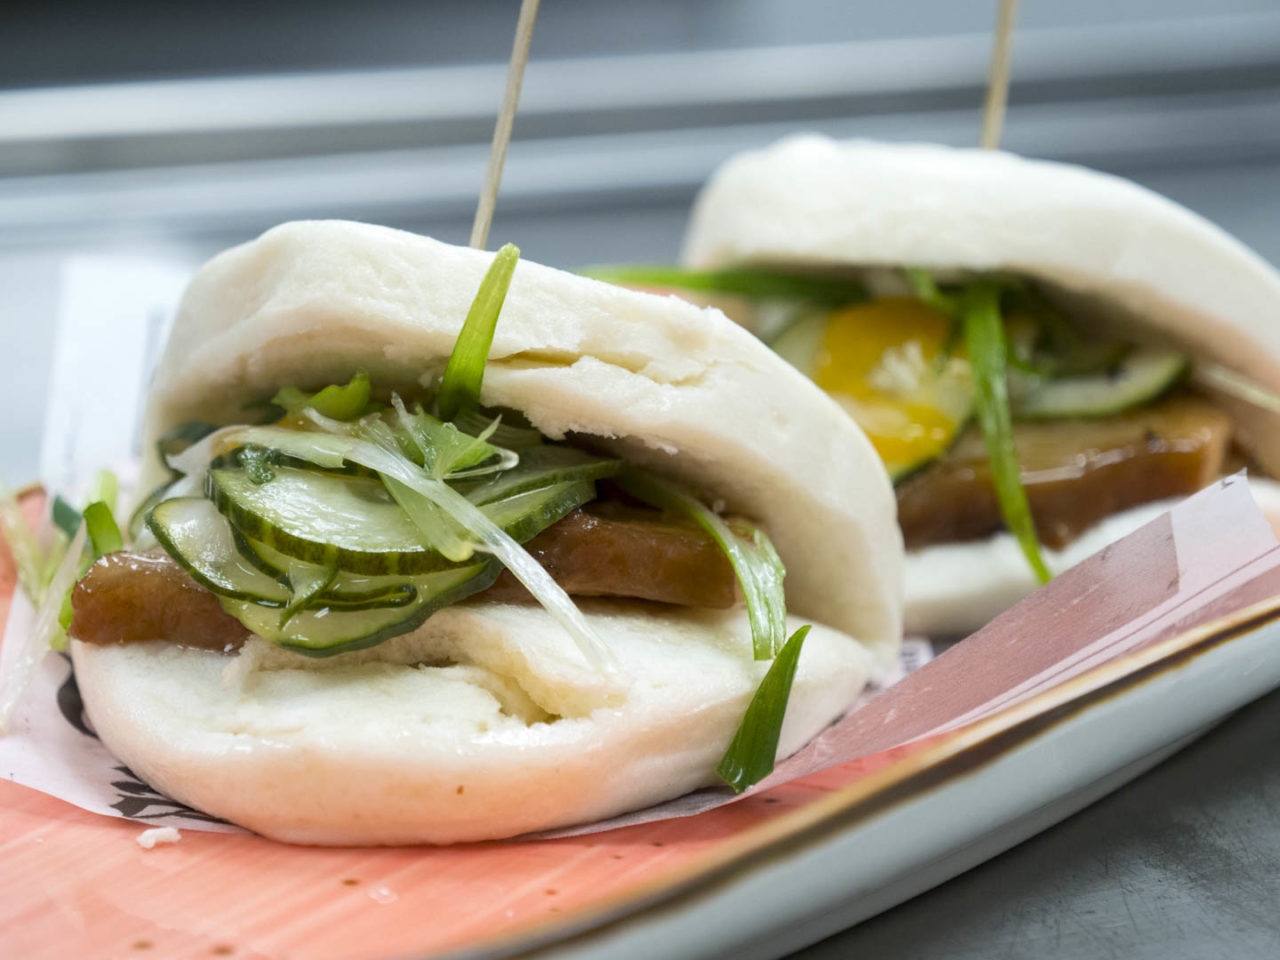 Steamed Buns at Chigama - photo by Dennis Spielman